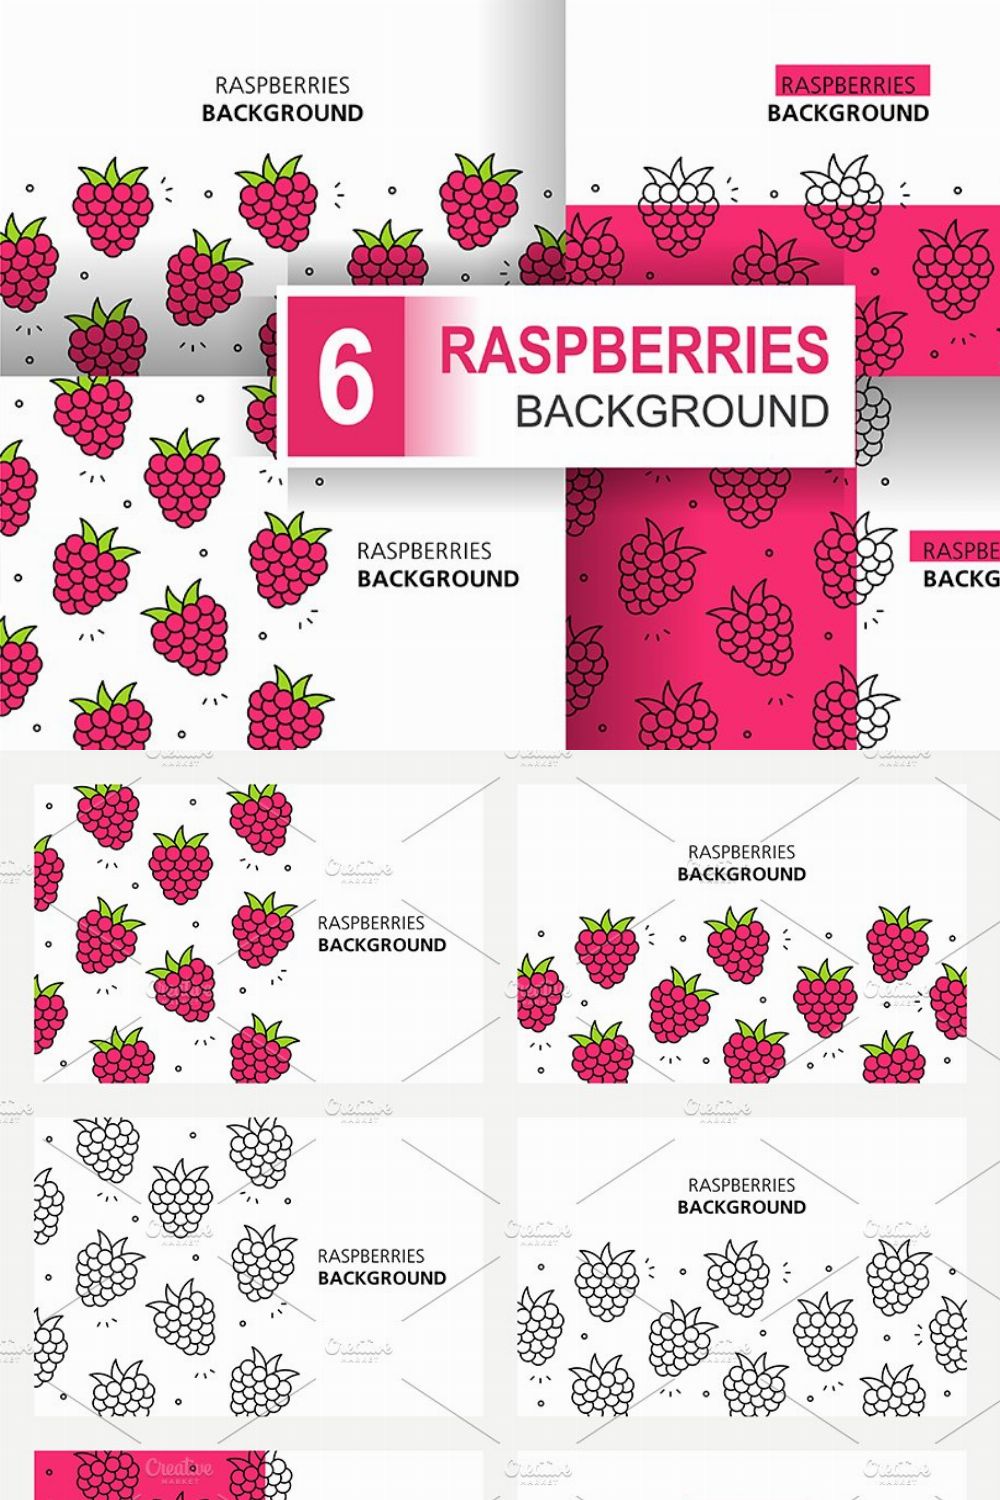 Raspberries background pinterest preview image.